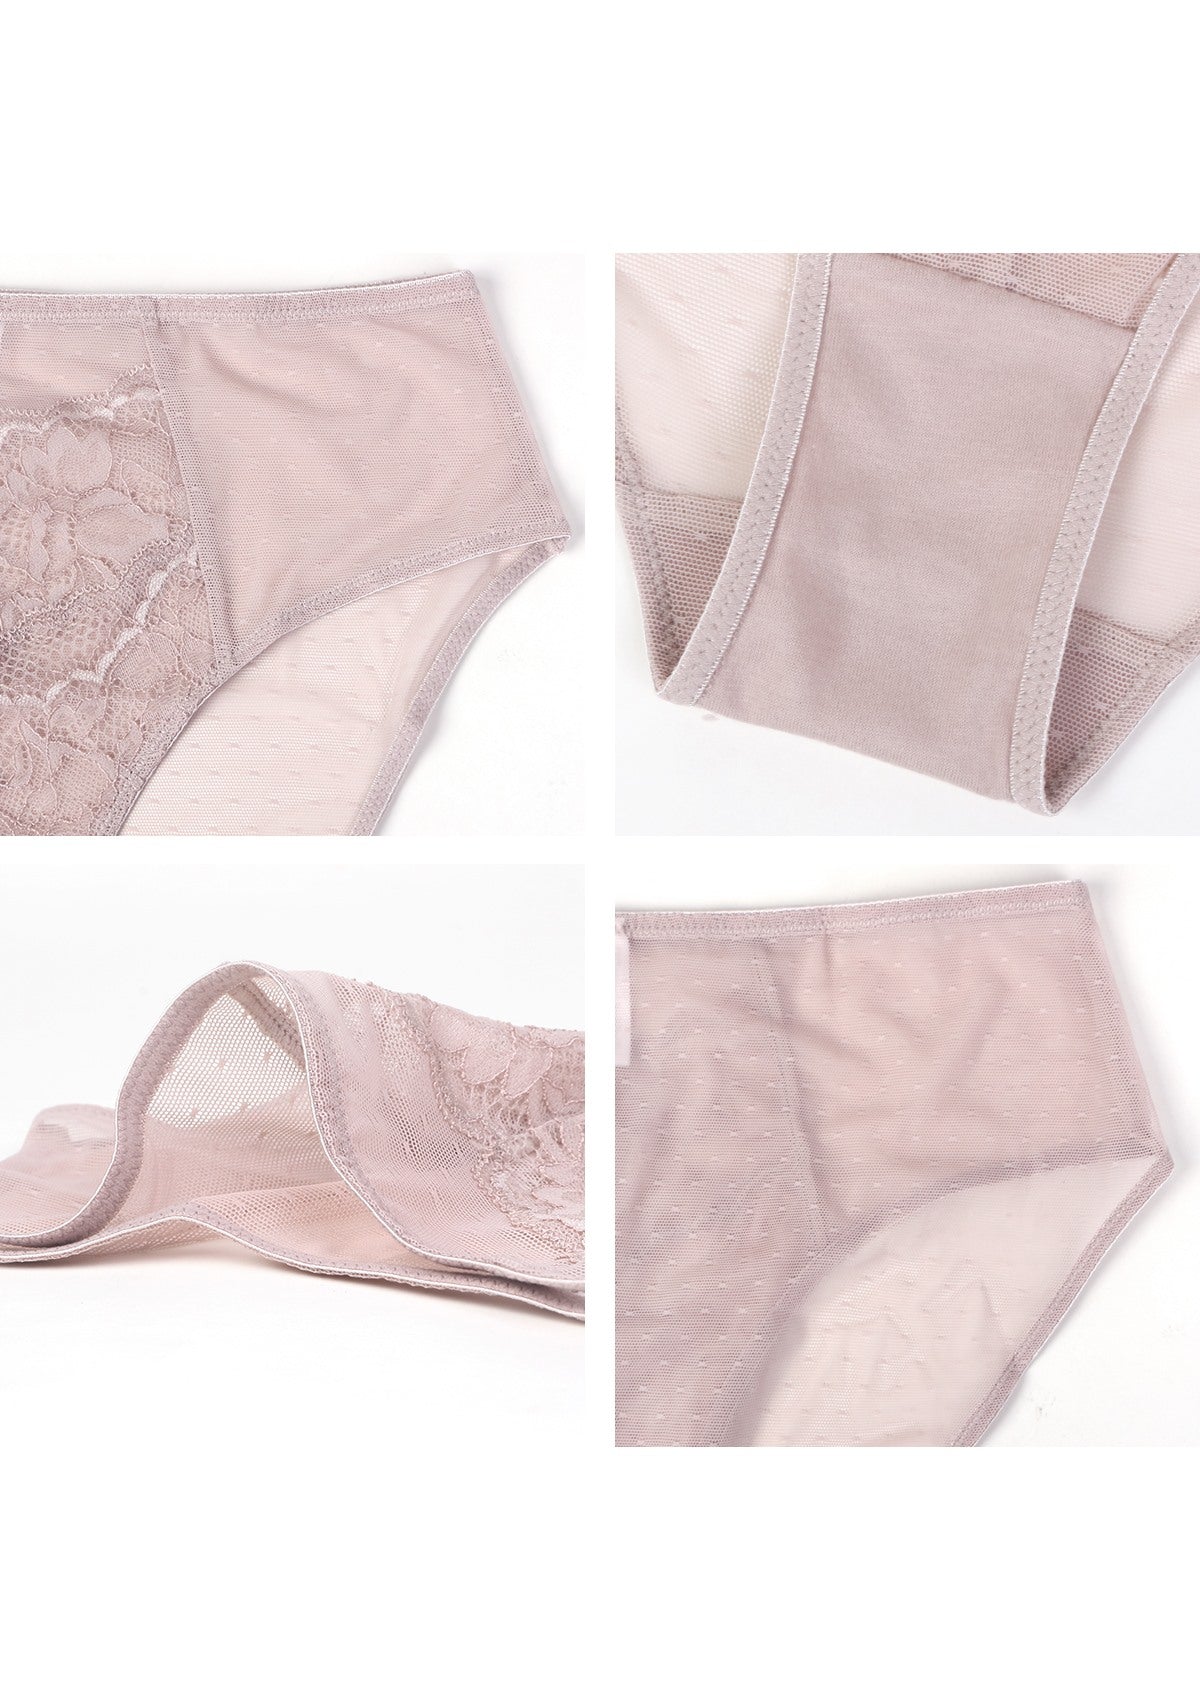 HSIA Enchante High-Rise Floral Lacy Panty-Comfort In Style - XXL / Dark Pink